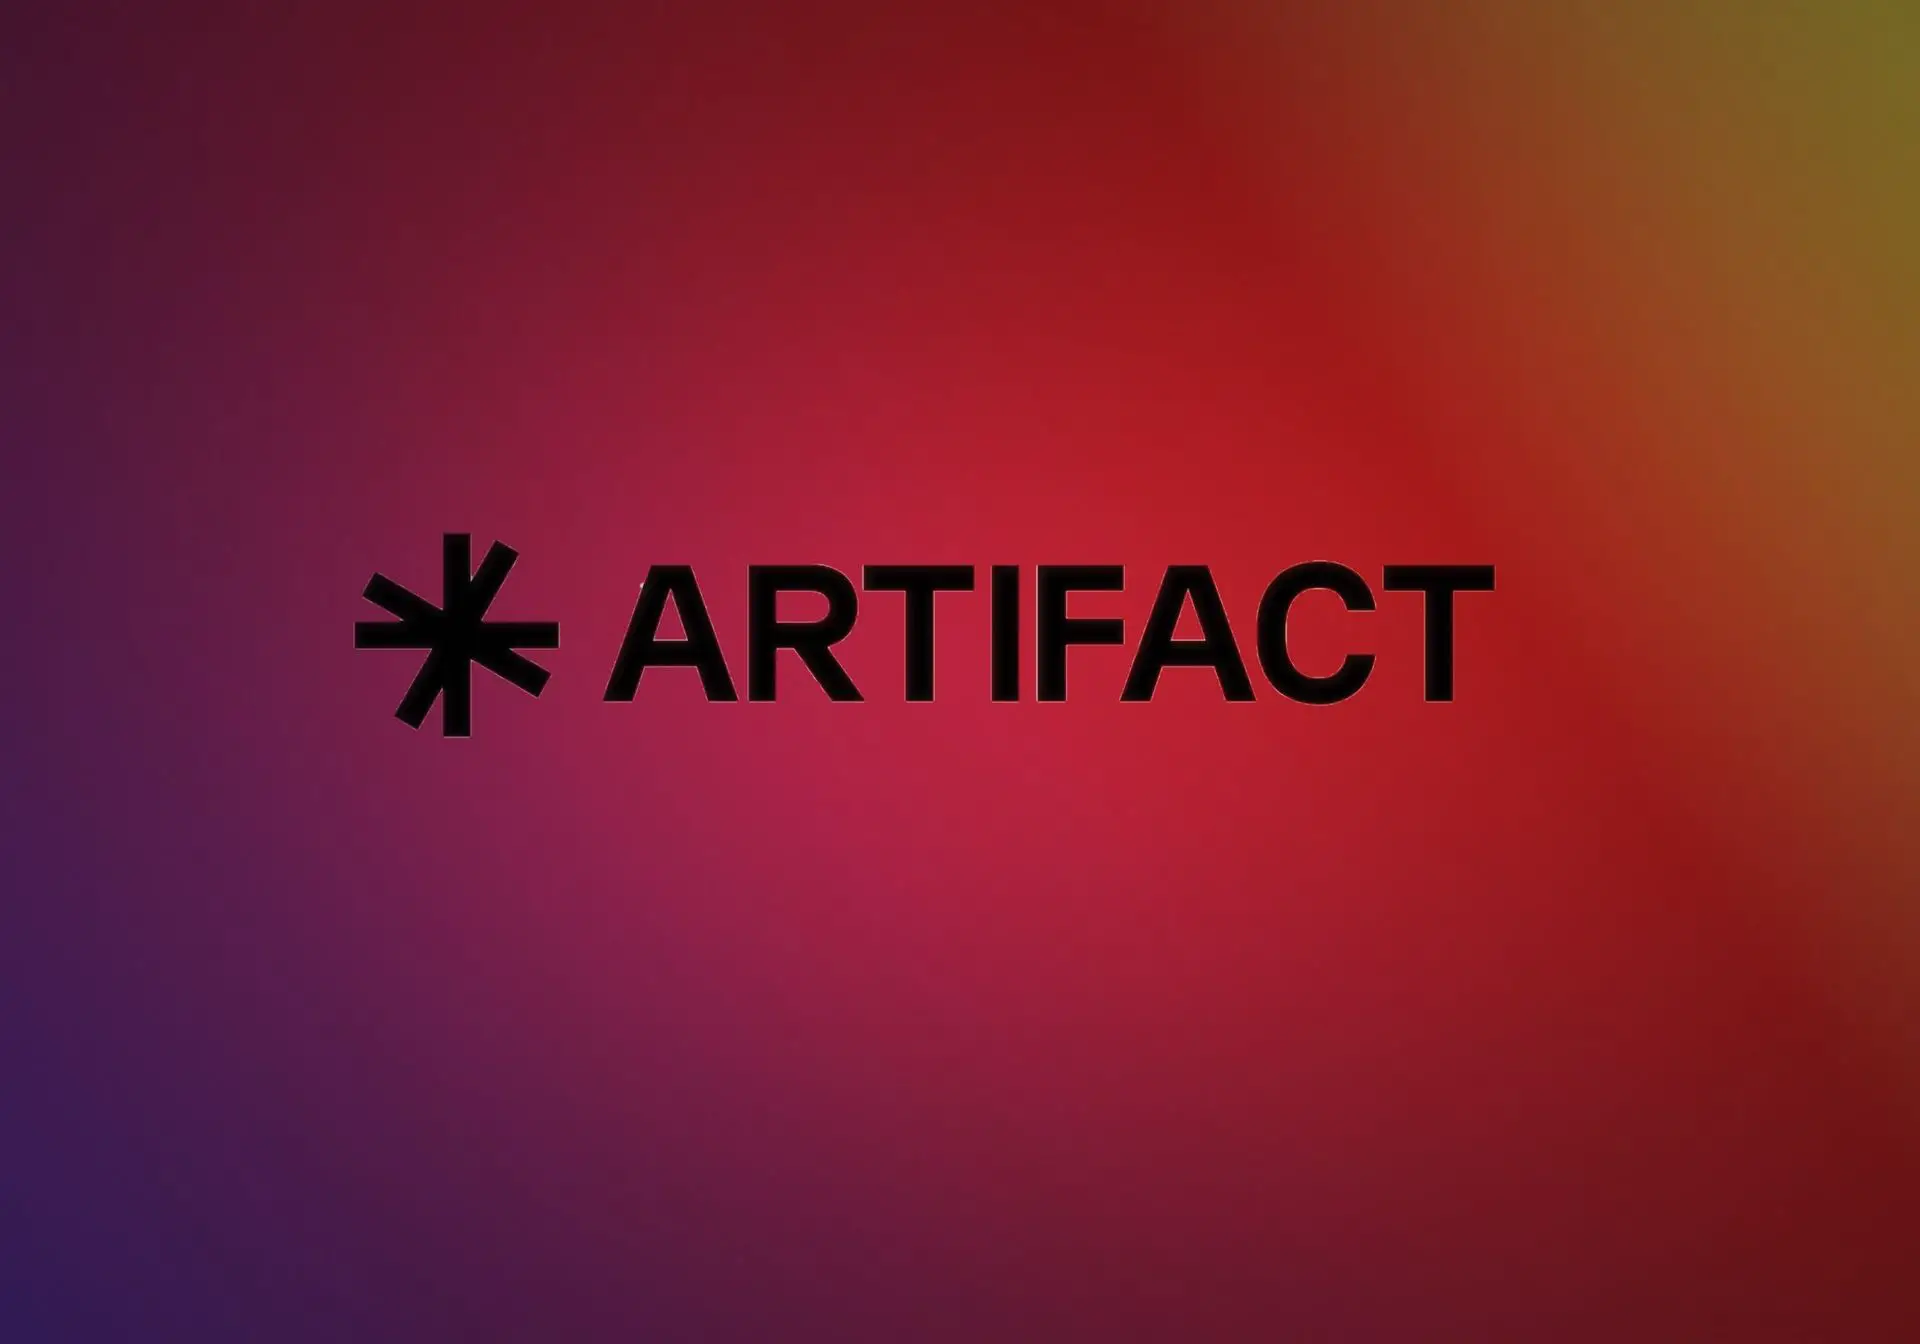 How To Download Artifact News App On iPhone